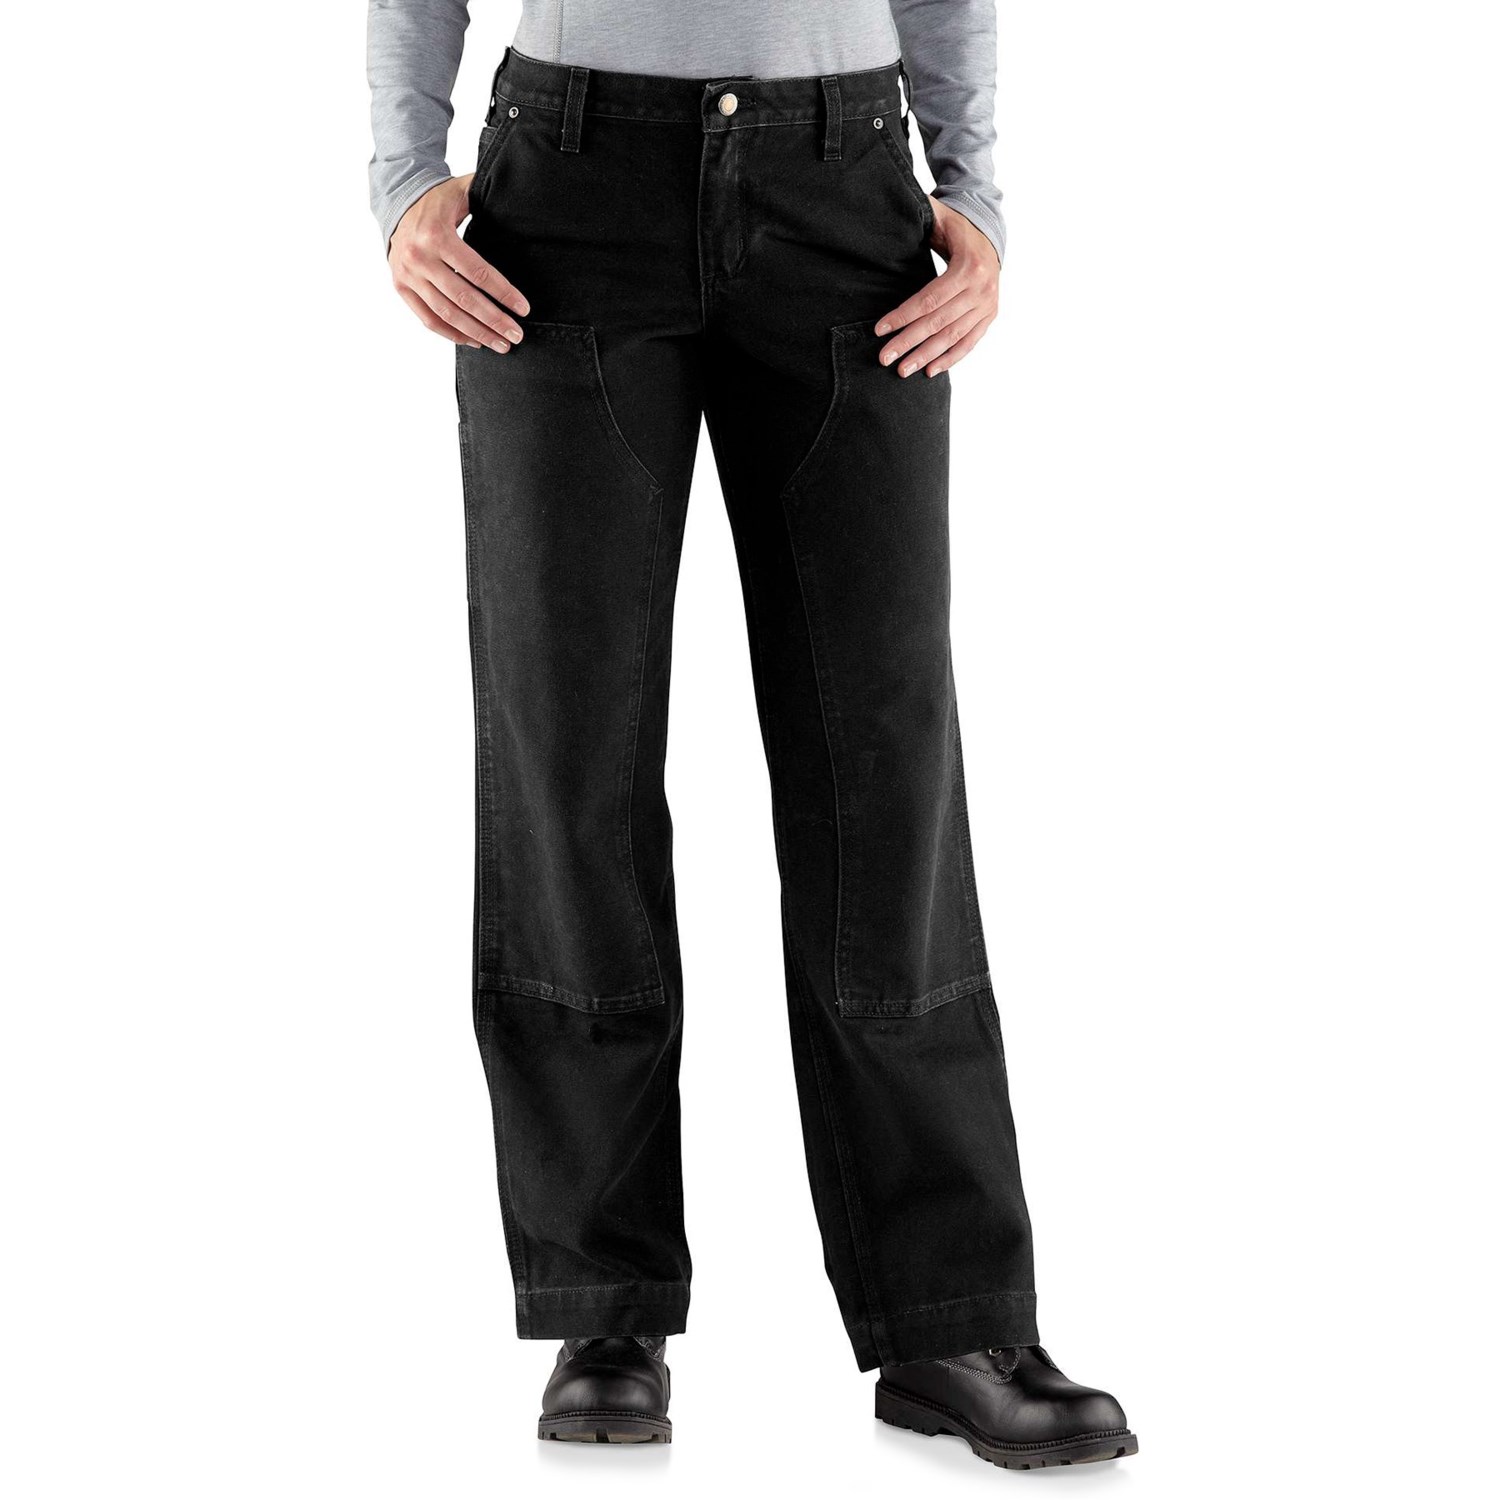 Carhartt Kane Relaxed-Fit Dungaree Jeans (For Women)